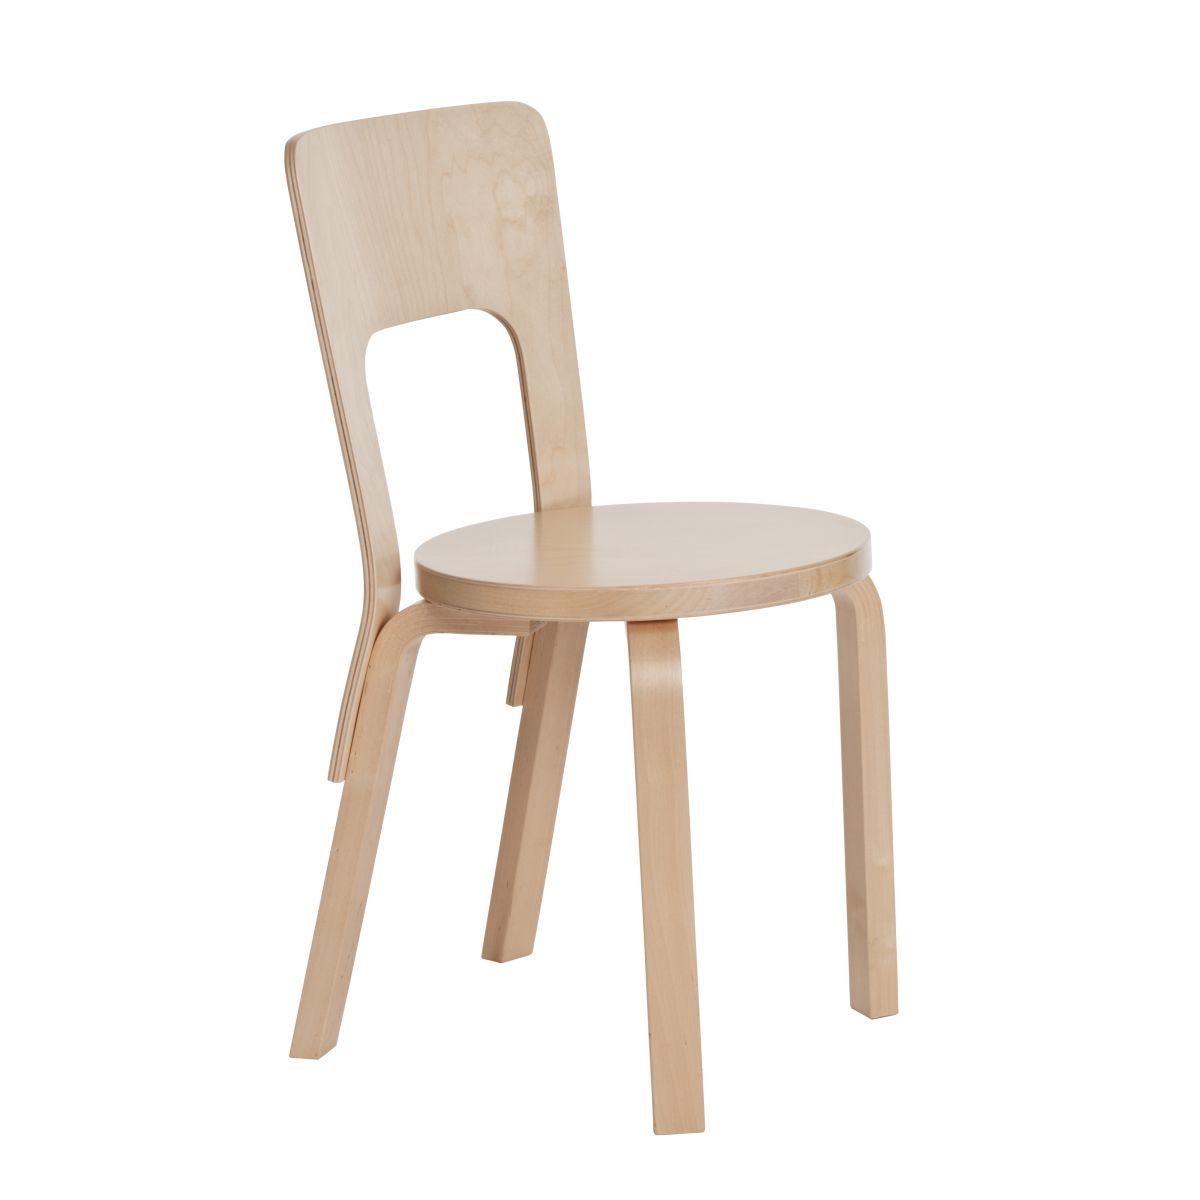 Chair-66-Clear-Lacquer